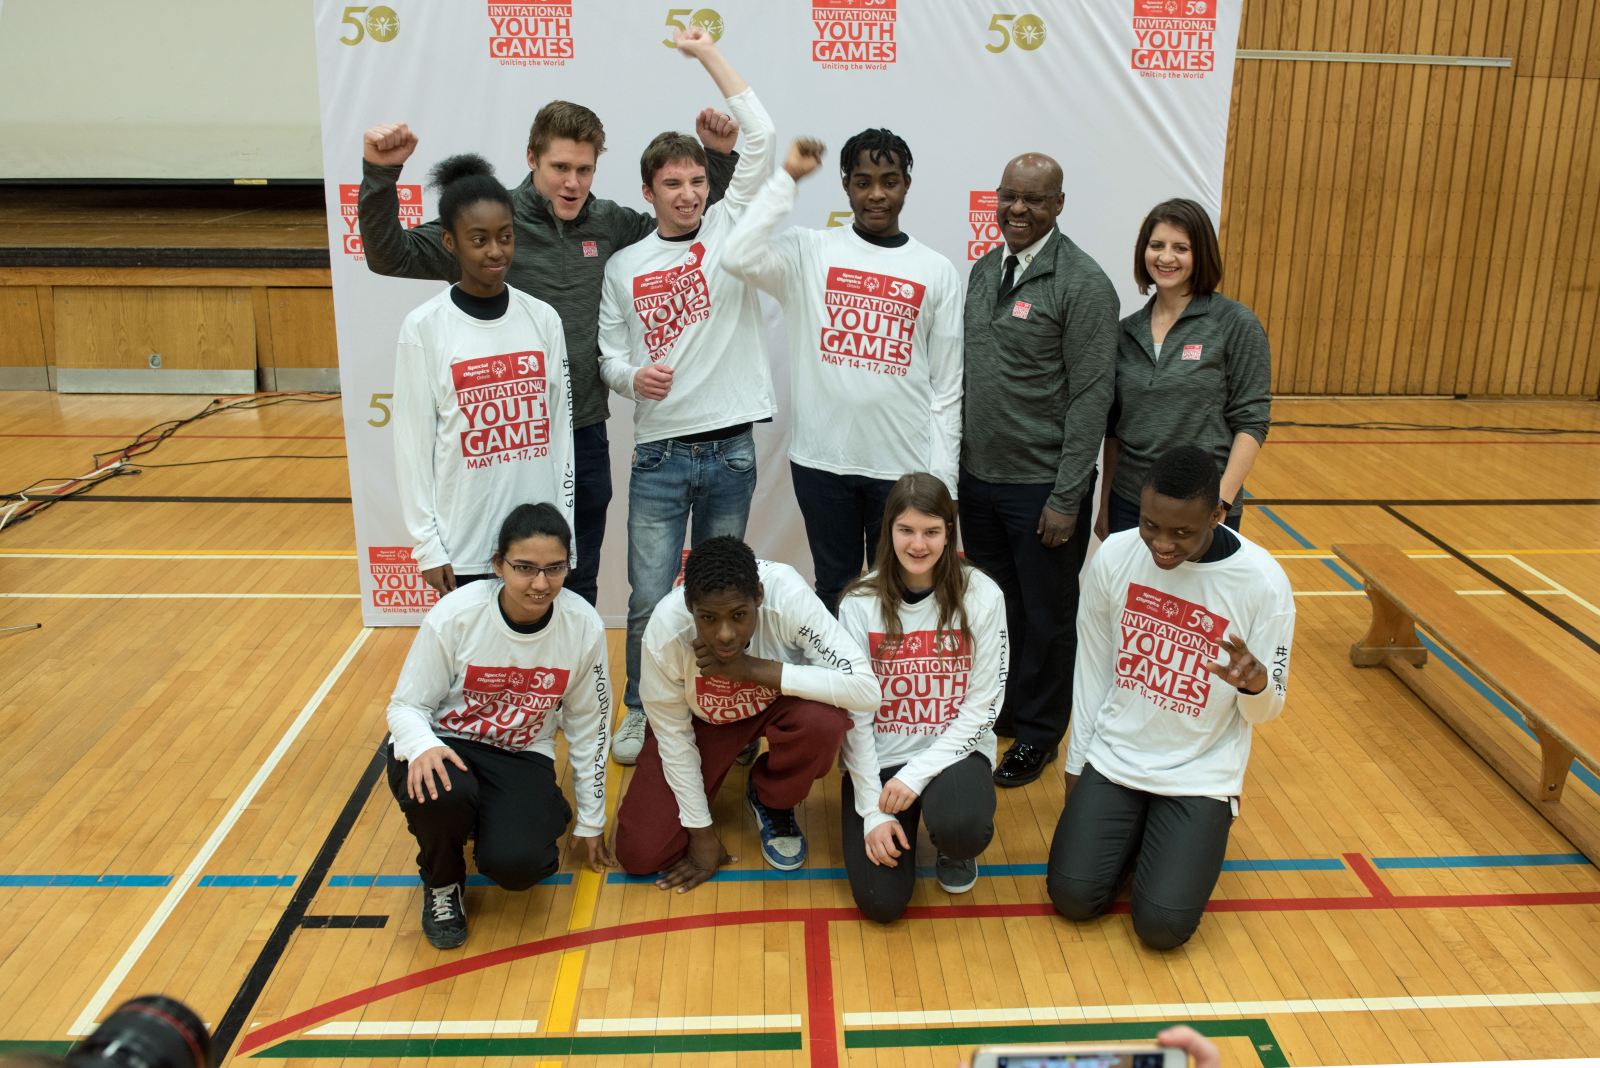 7 Students and 3 adults posing in front of a branded backdrop for the Invitational Youth Games